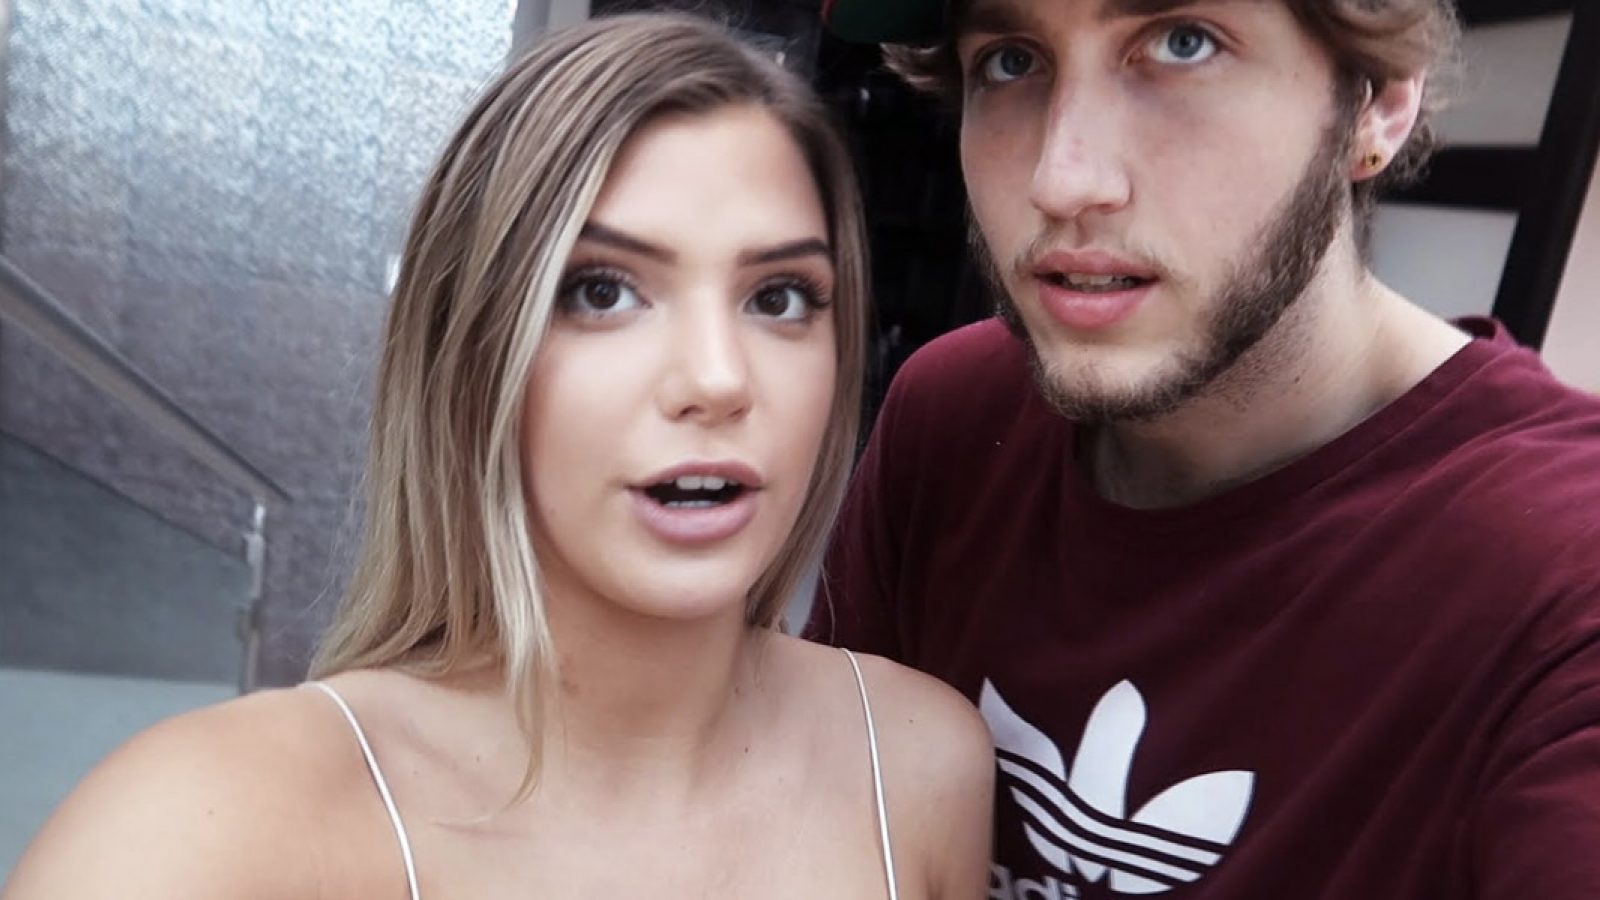 Alissa violet pulls song gets photos